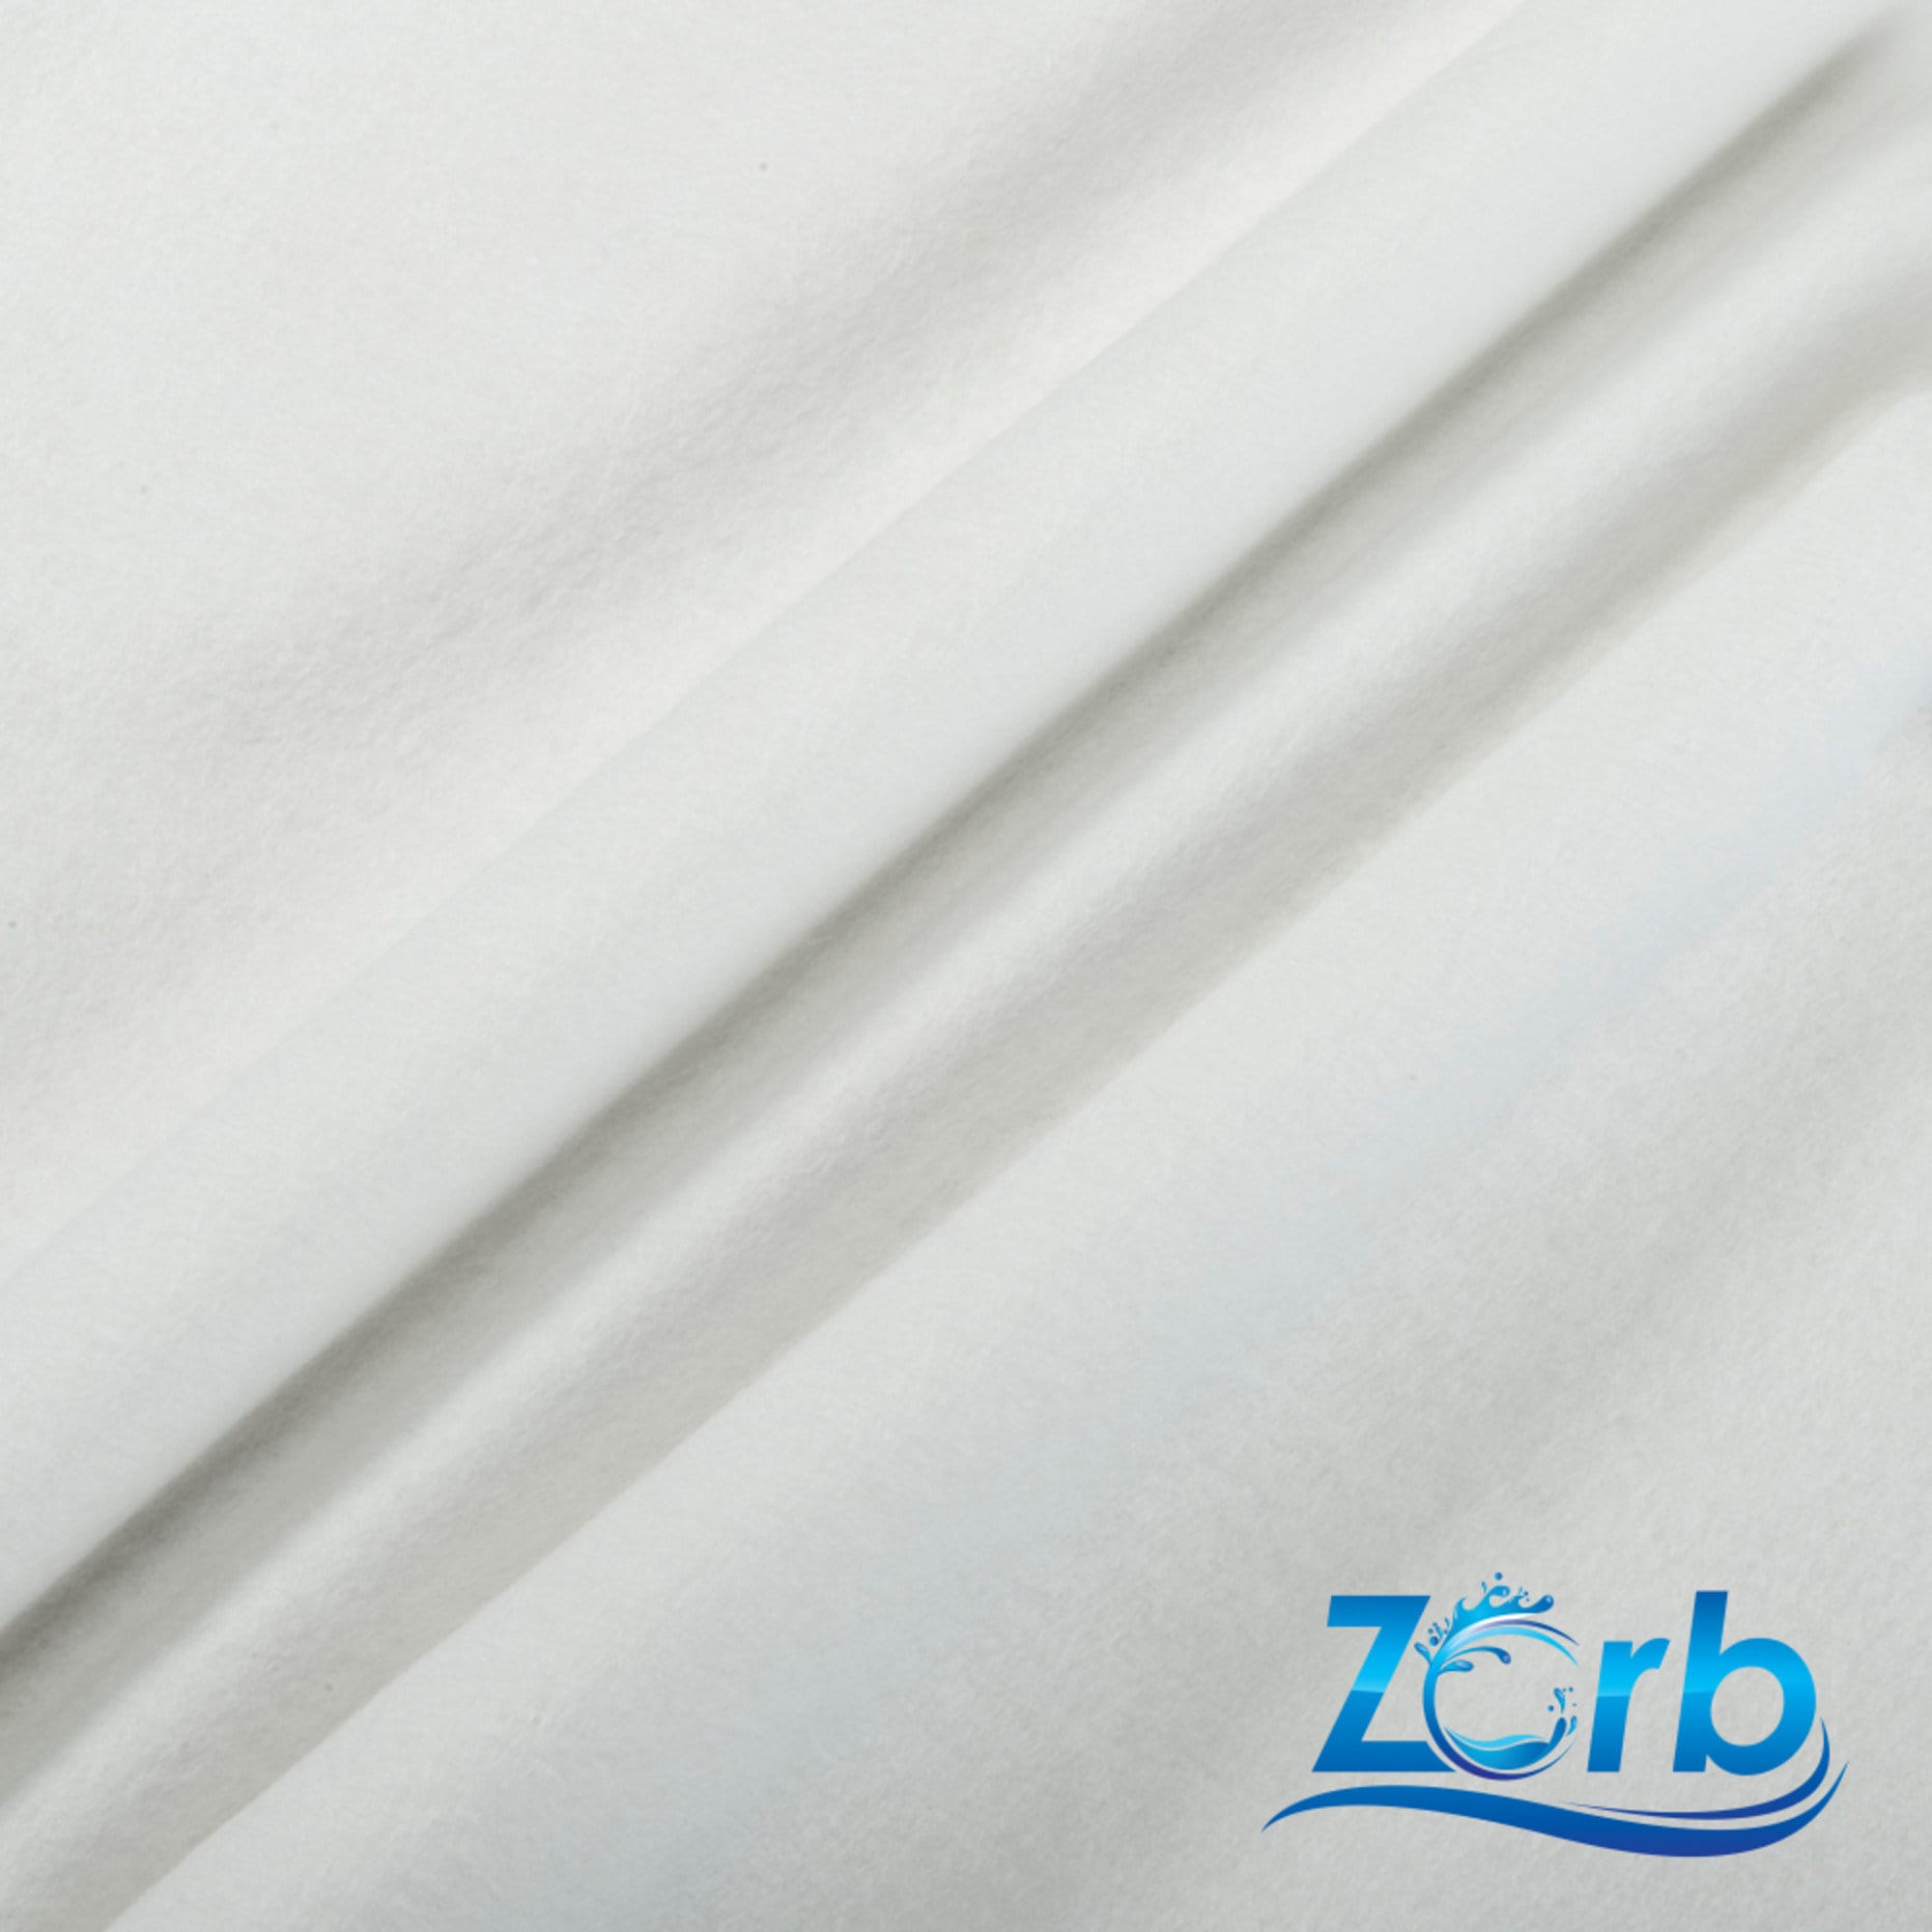 4-Way Stretch Fabric - Breathable and Absorbent